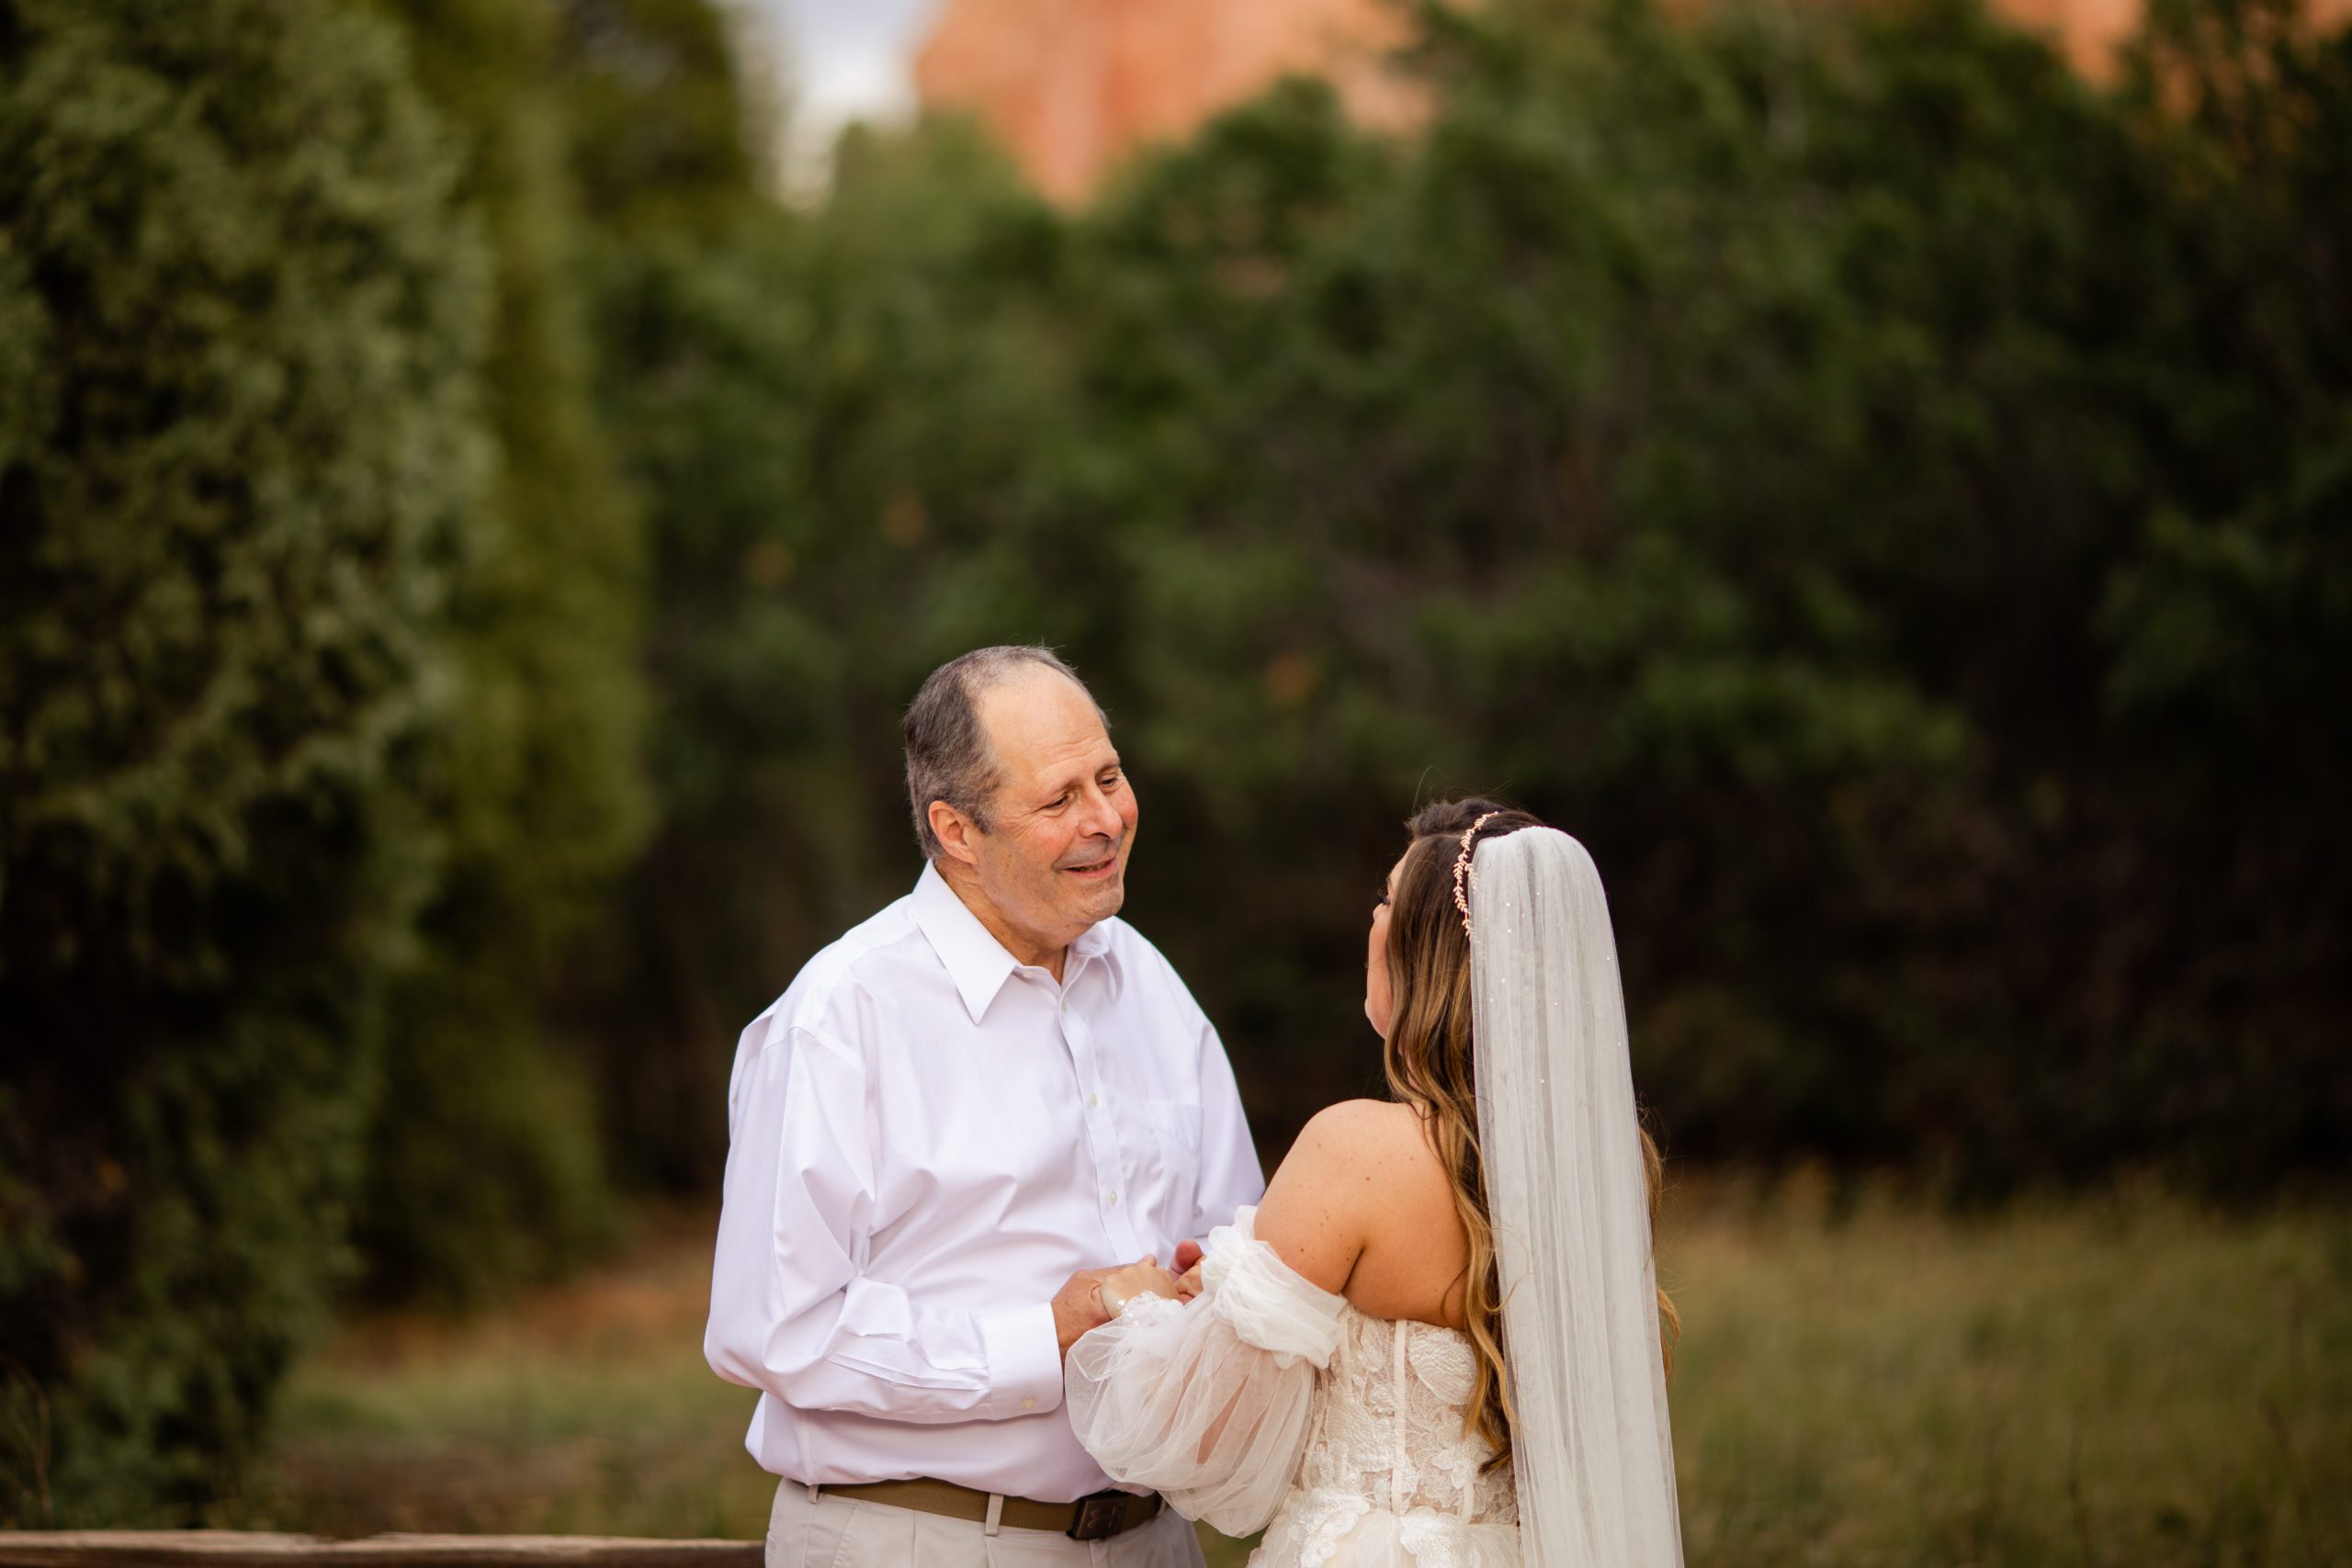 Father of the bride looking lovingly at his daughter the bride at the Garden of the Gods